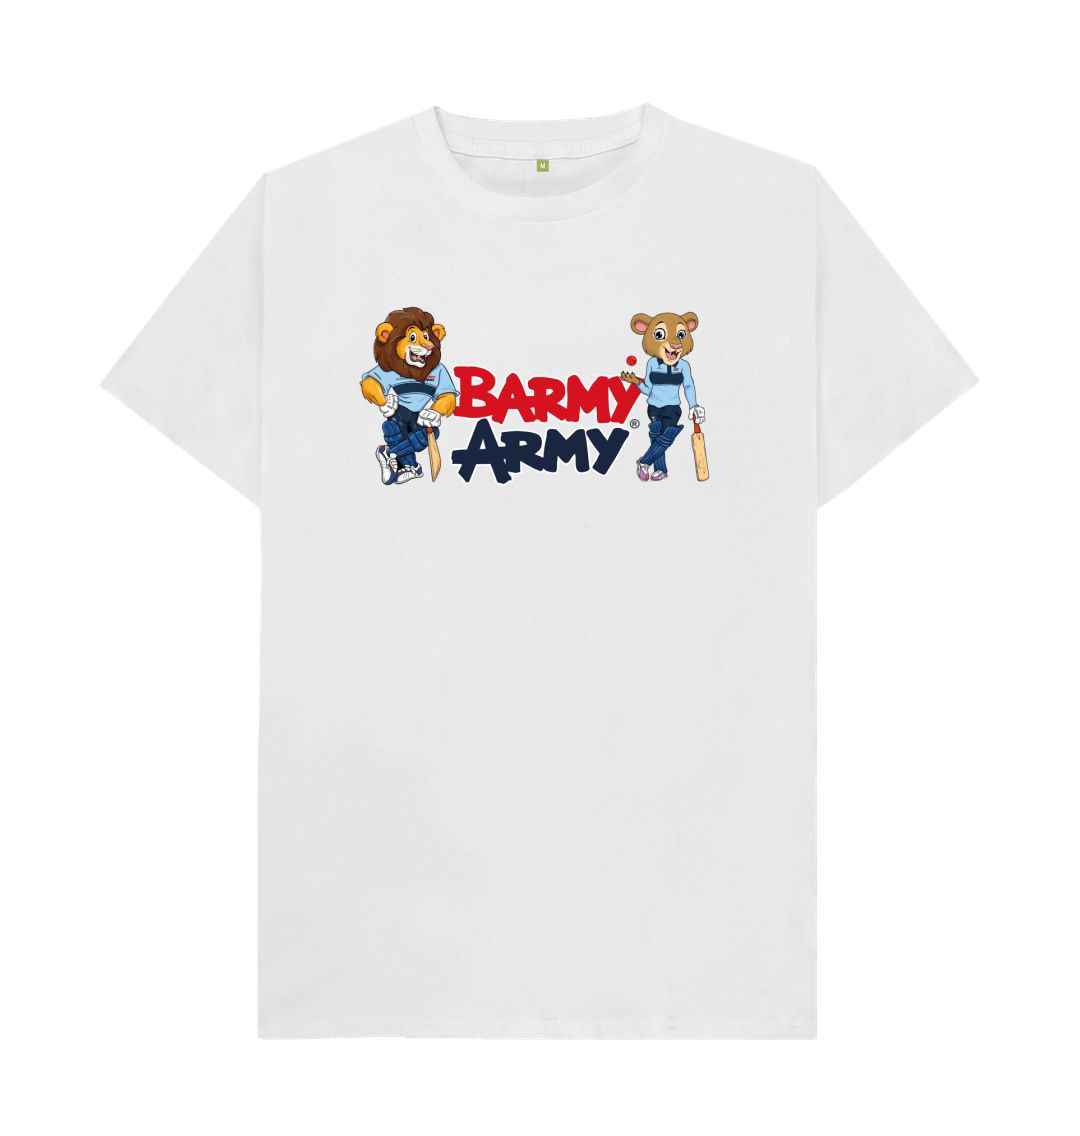 White Barmy Army Mascots Tee - Men's